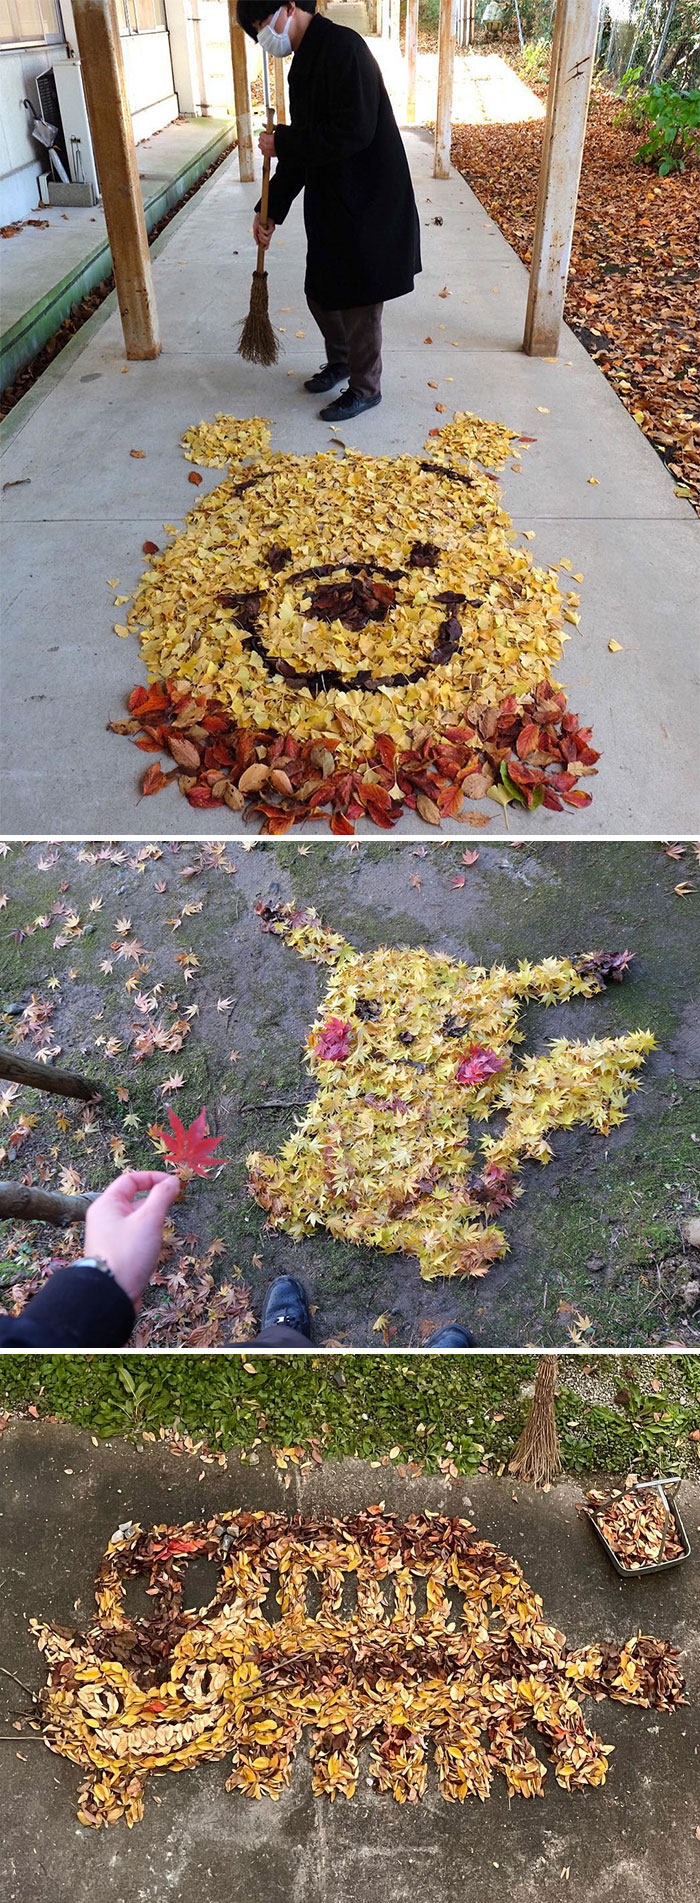 This Elementary Teacher Rakes Leaves In The Schoolyard Into Adorable Cartoon Characters Every Morning